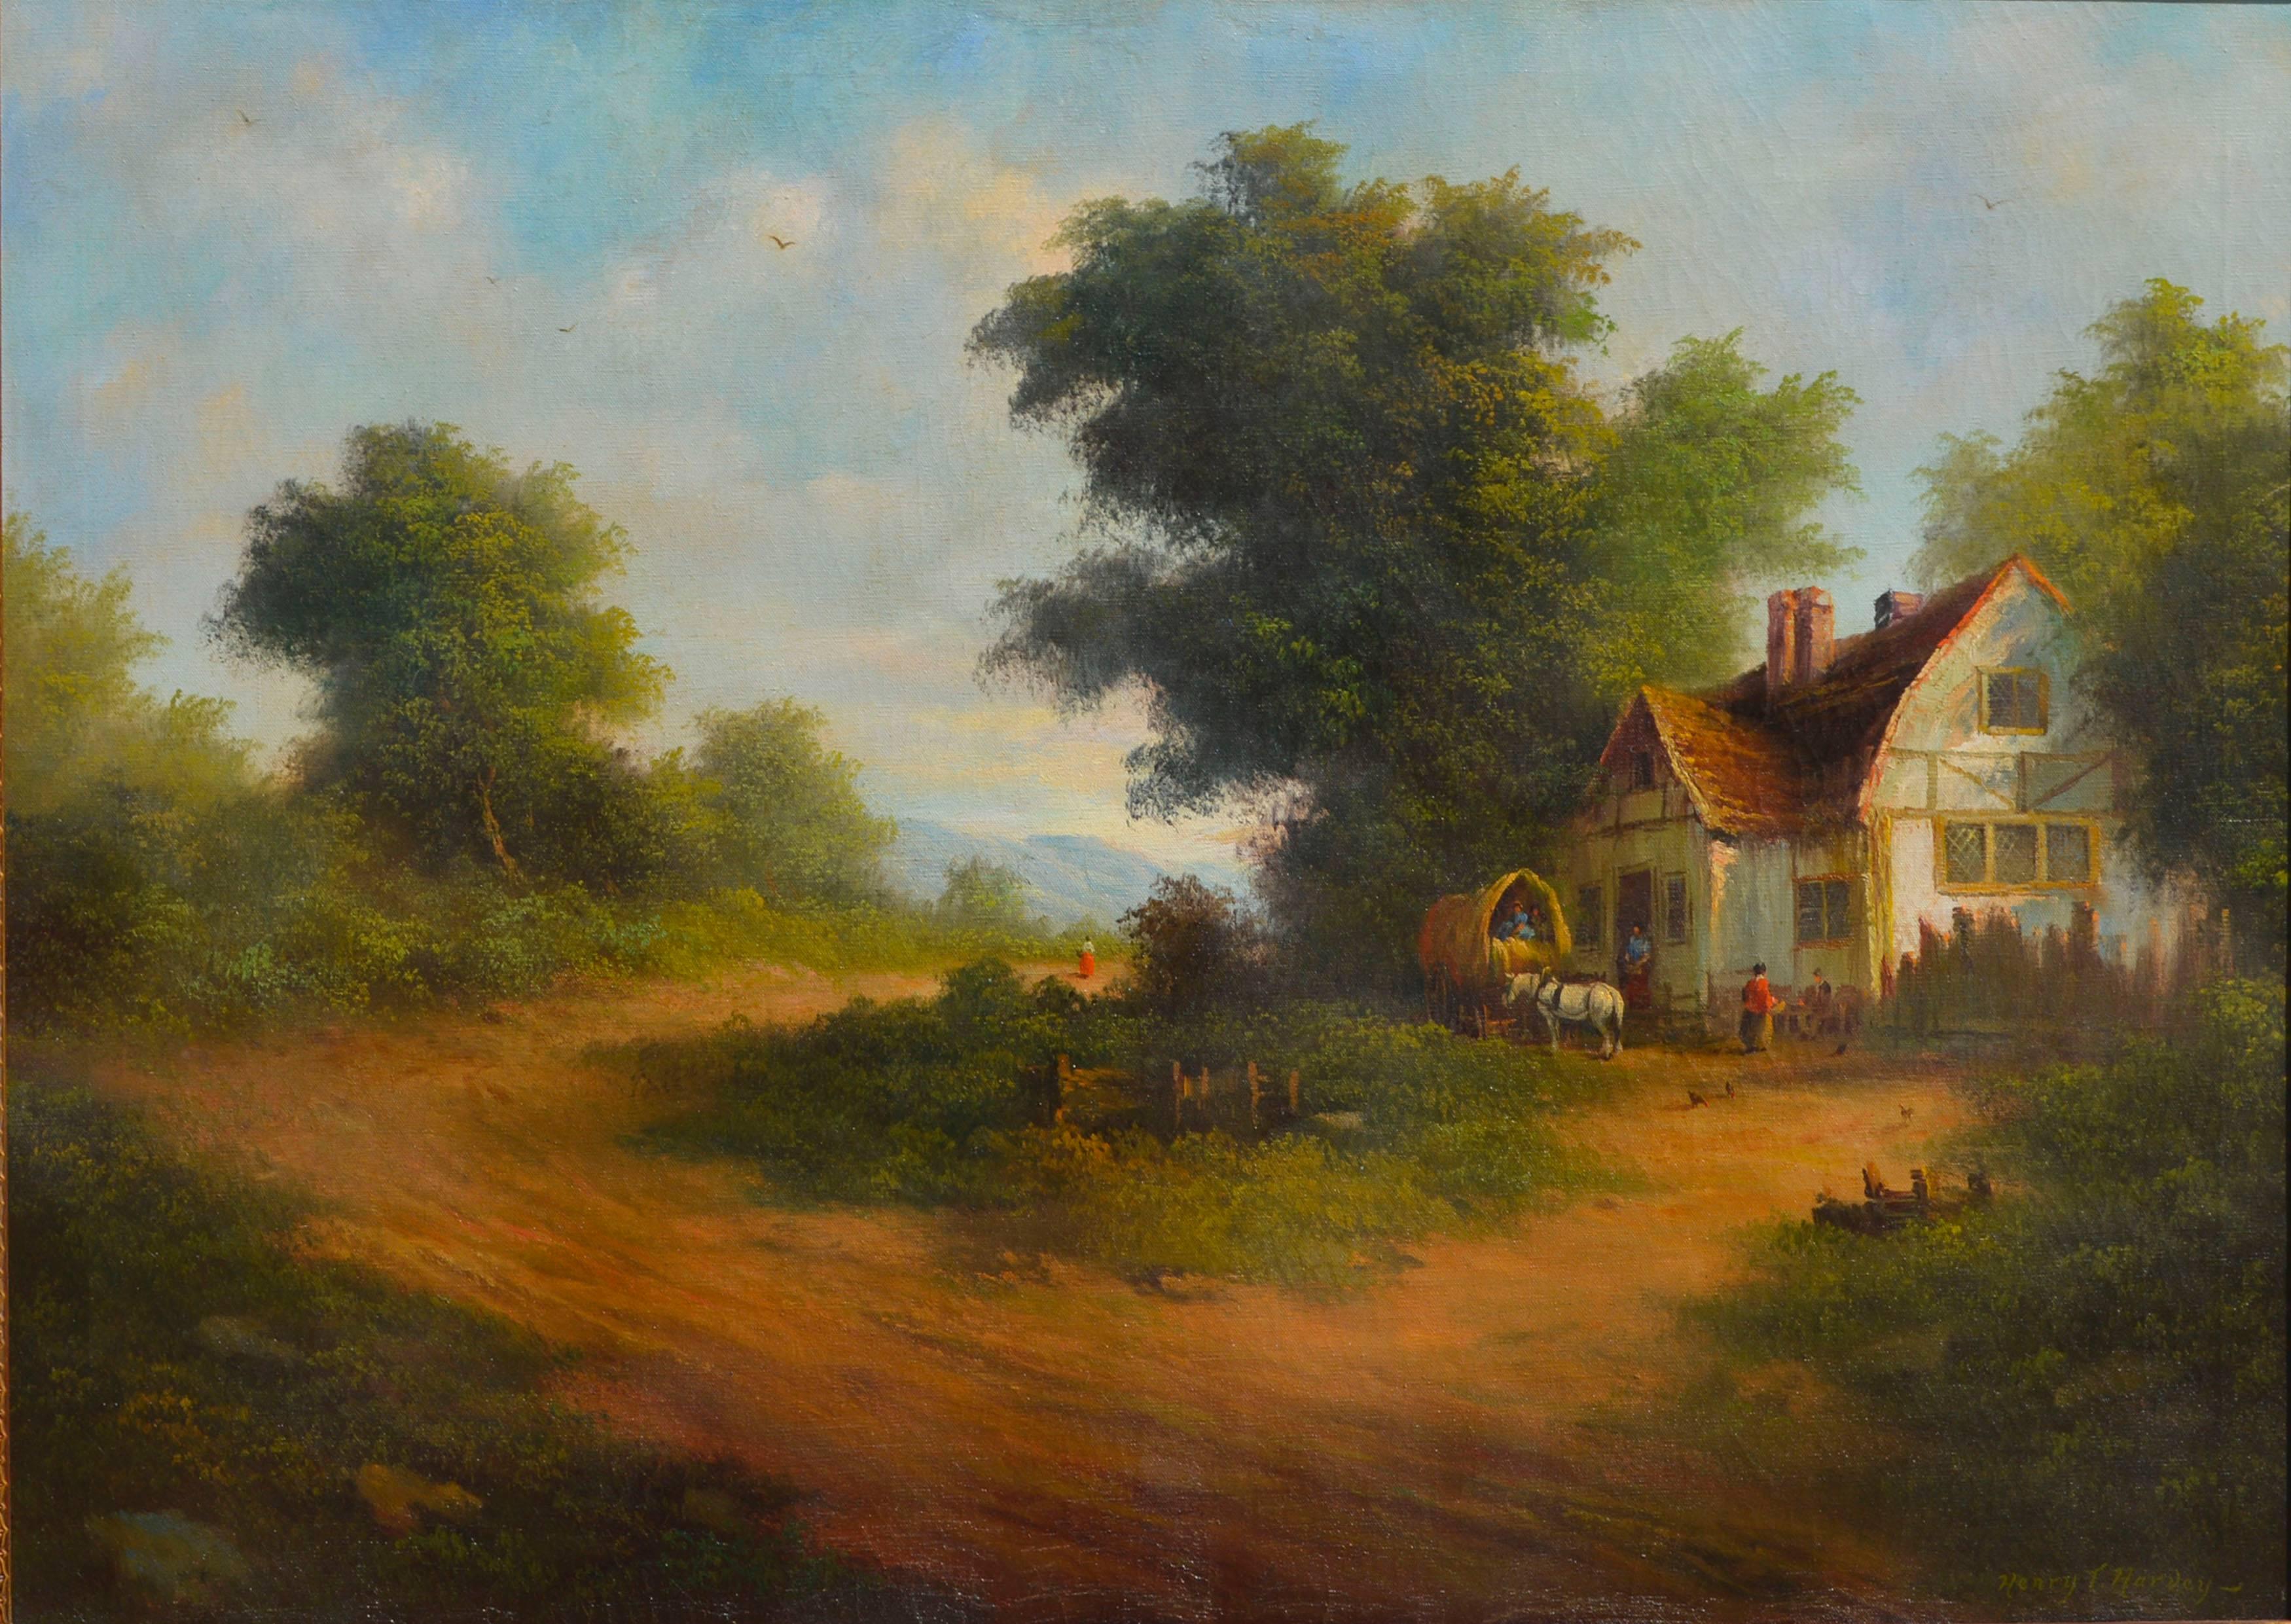 1940s English Country Cottage Landscape - Painting by Henry T. Harvey